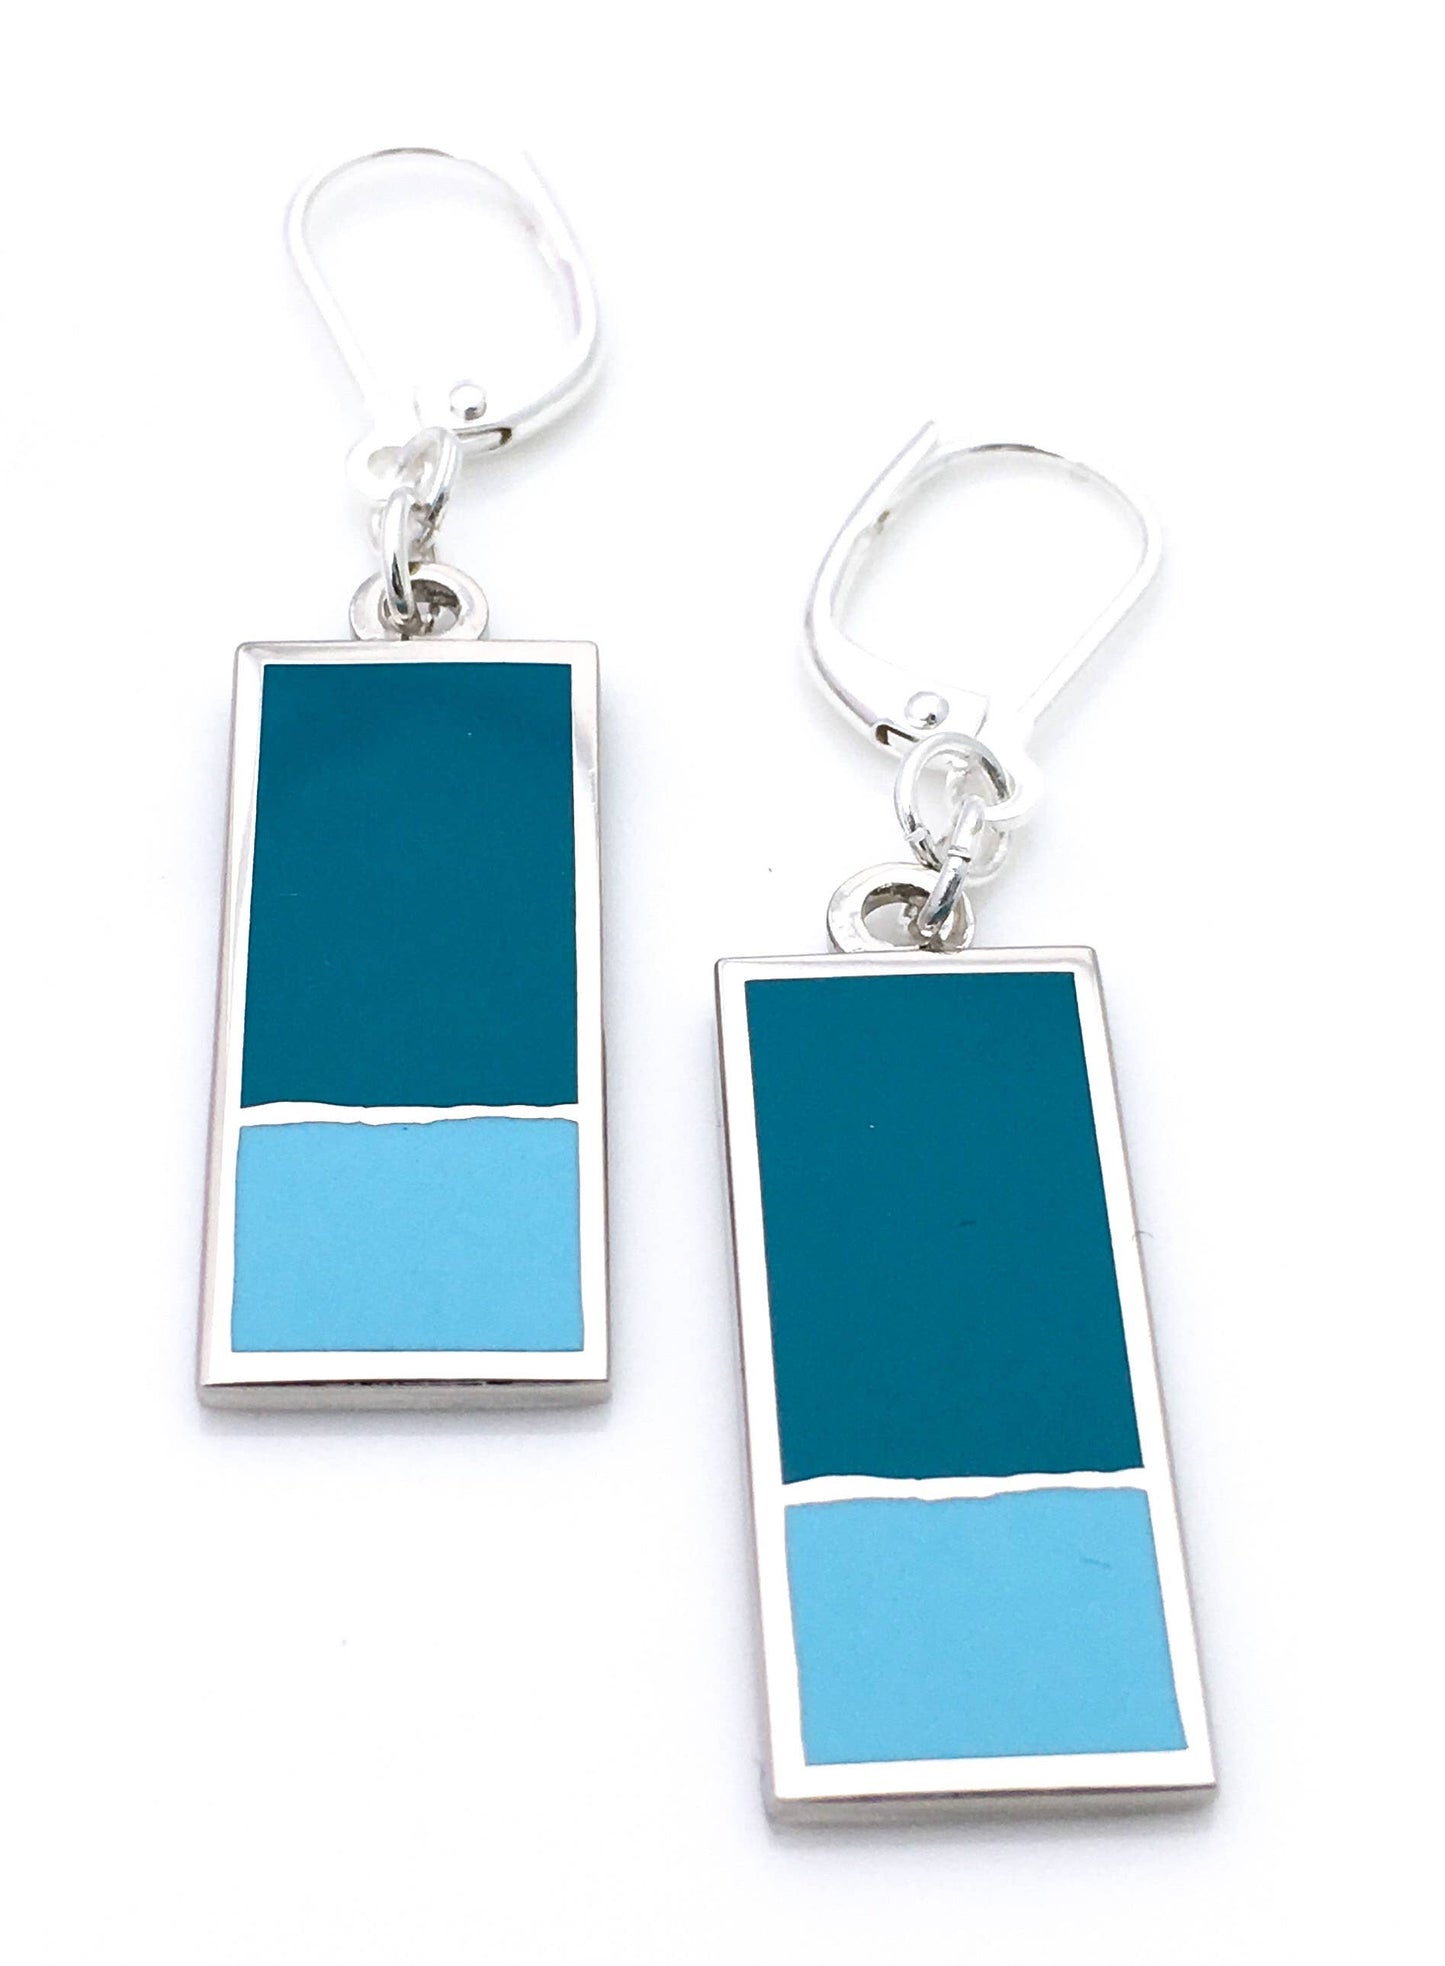 Enamel earrings with rectangle in teal enamel and smaller rectangle in a light blue